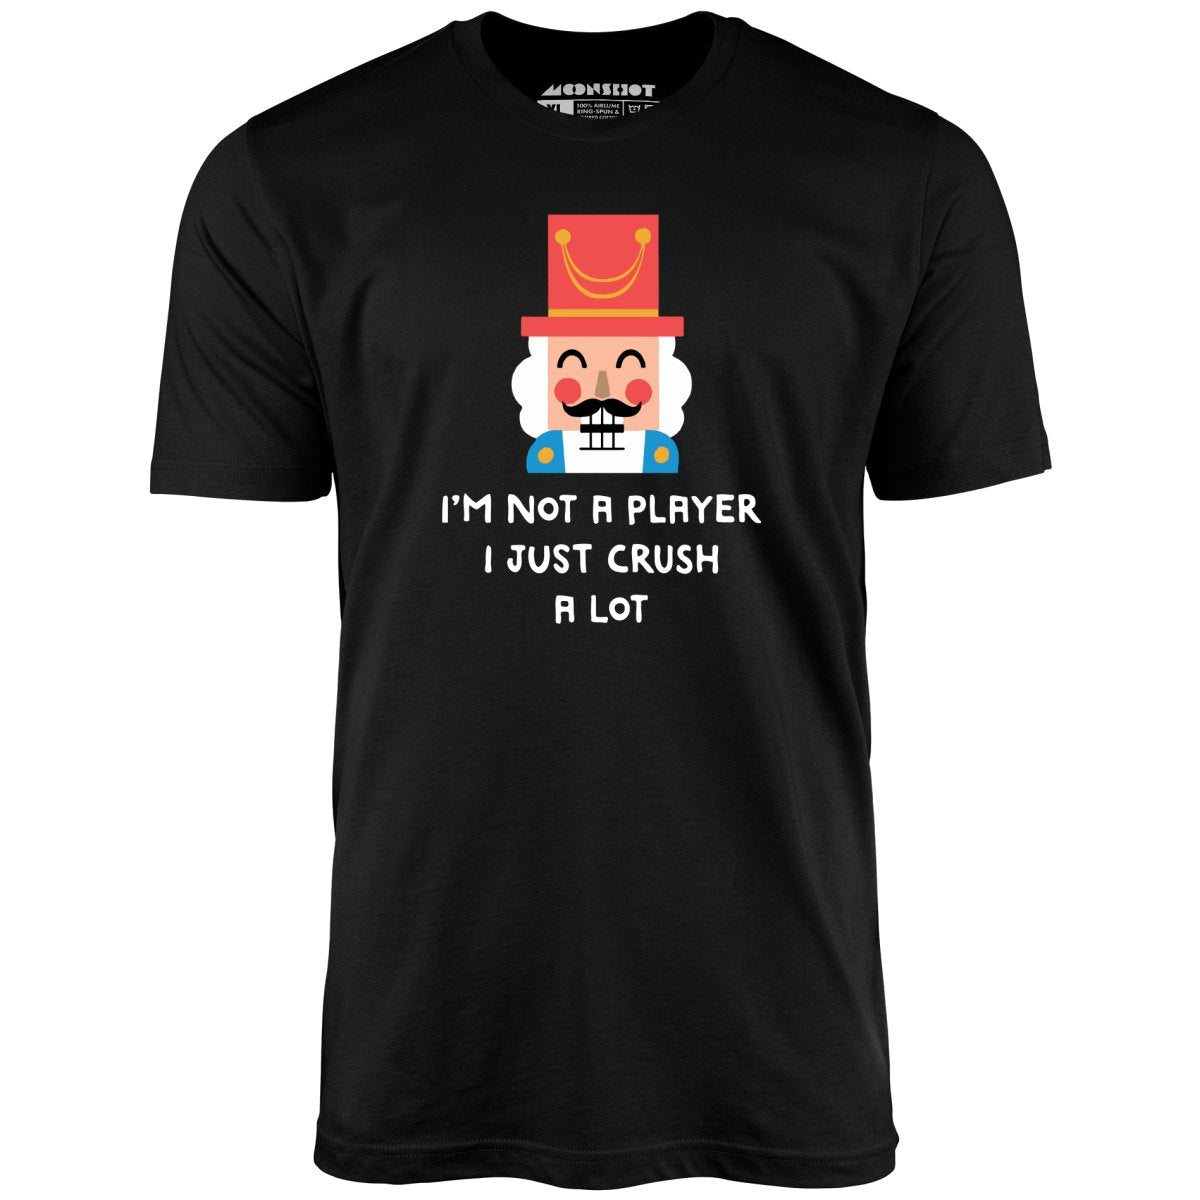 I'm Not a Player I Just Crush A Lot - Unisex T-Shirt